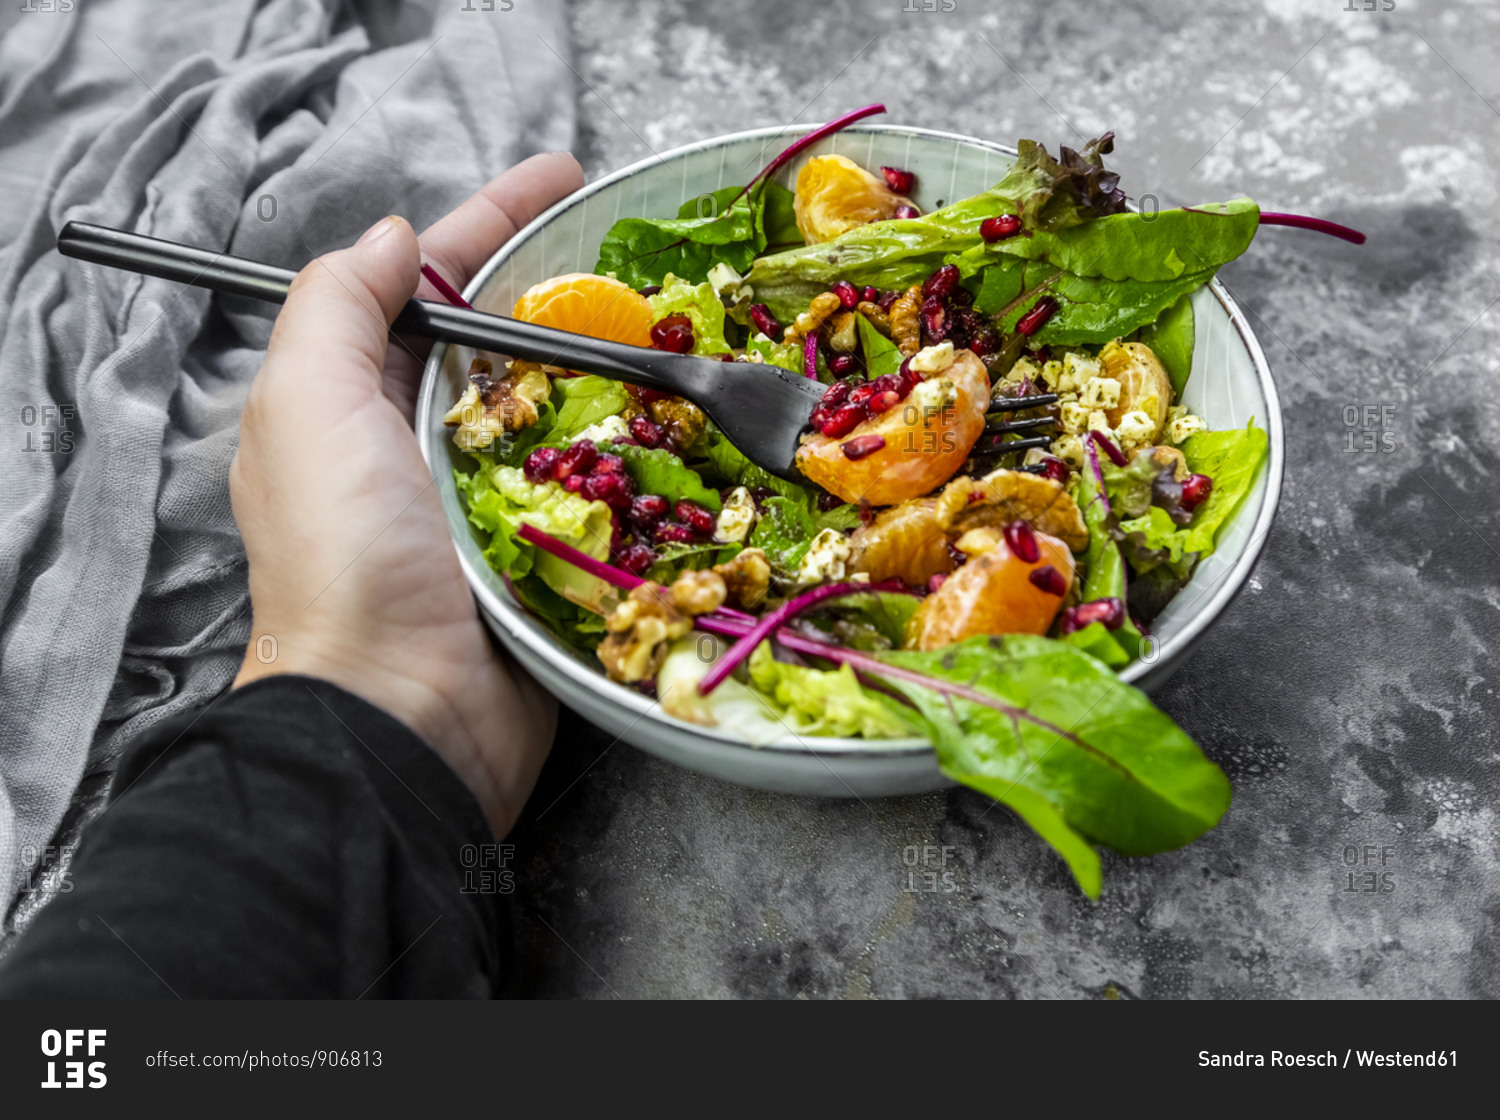 Hand holding bowl of winter salad with lettuce- tangerines- walnuts- feta and pomegranate seeds